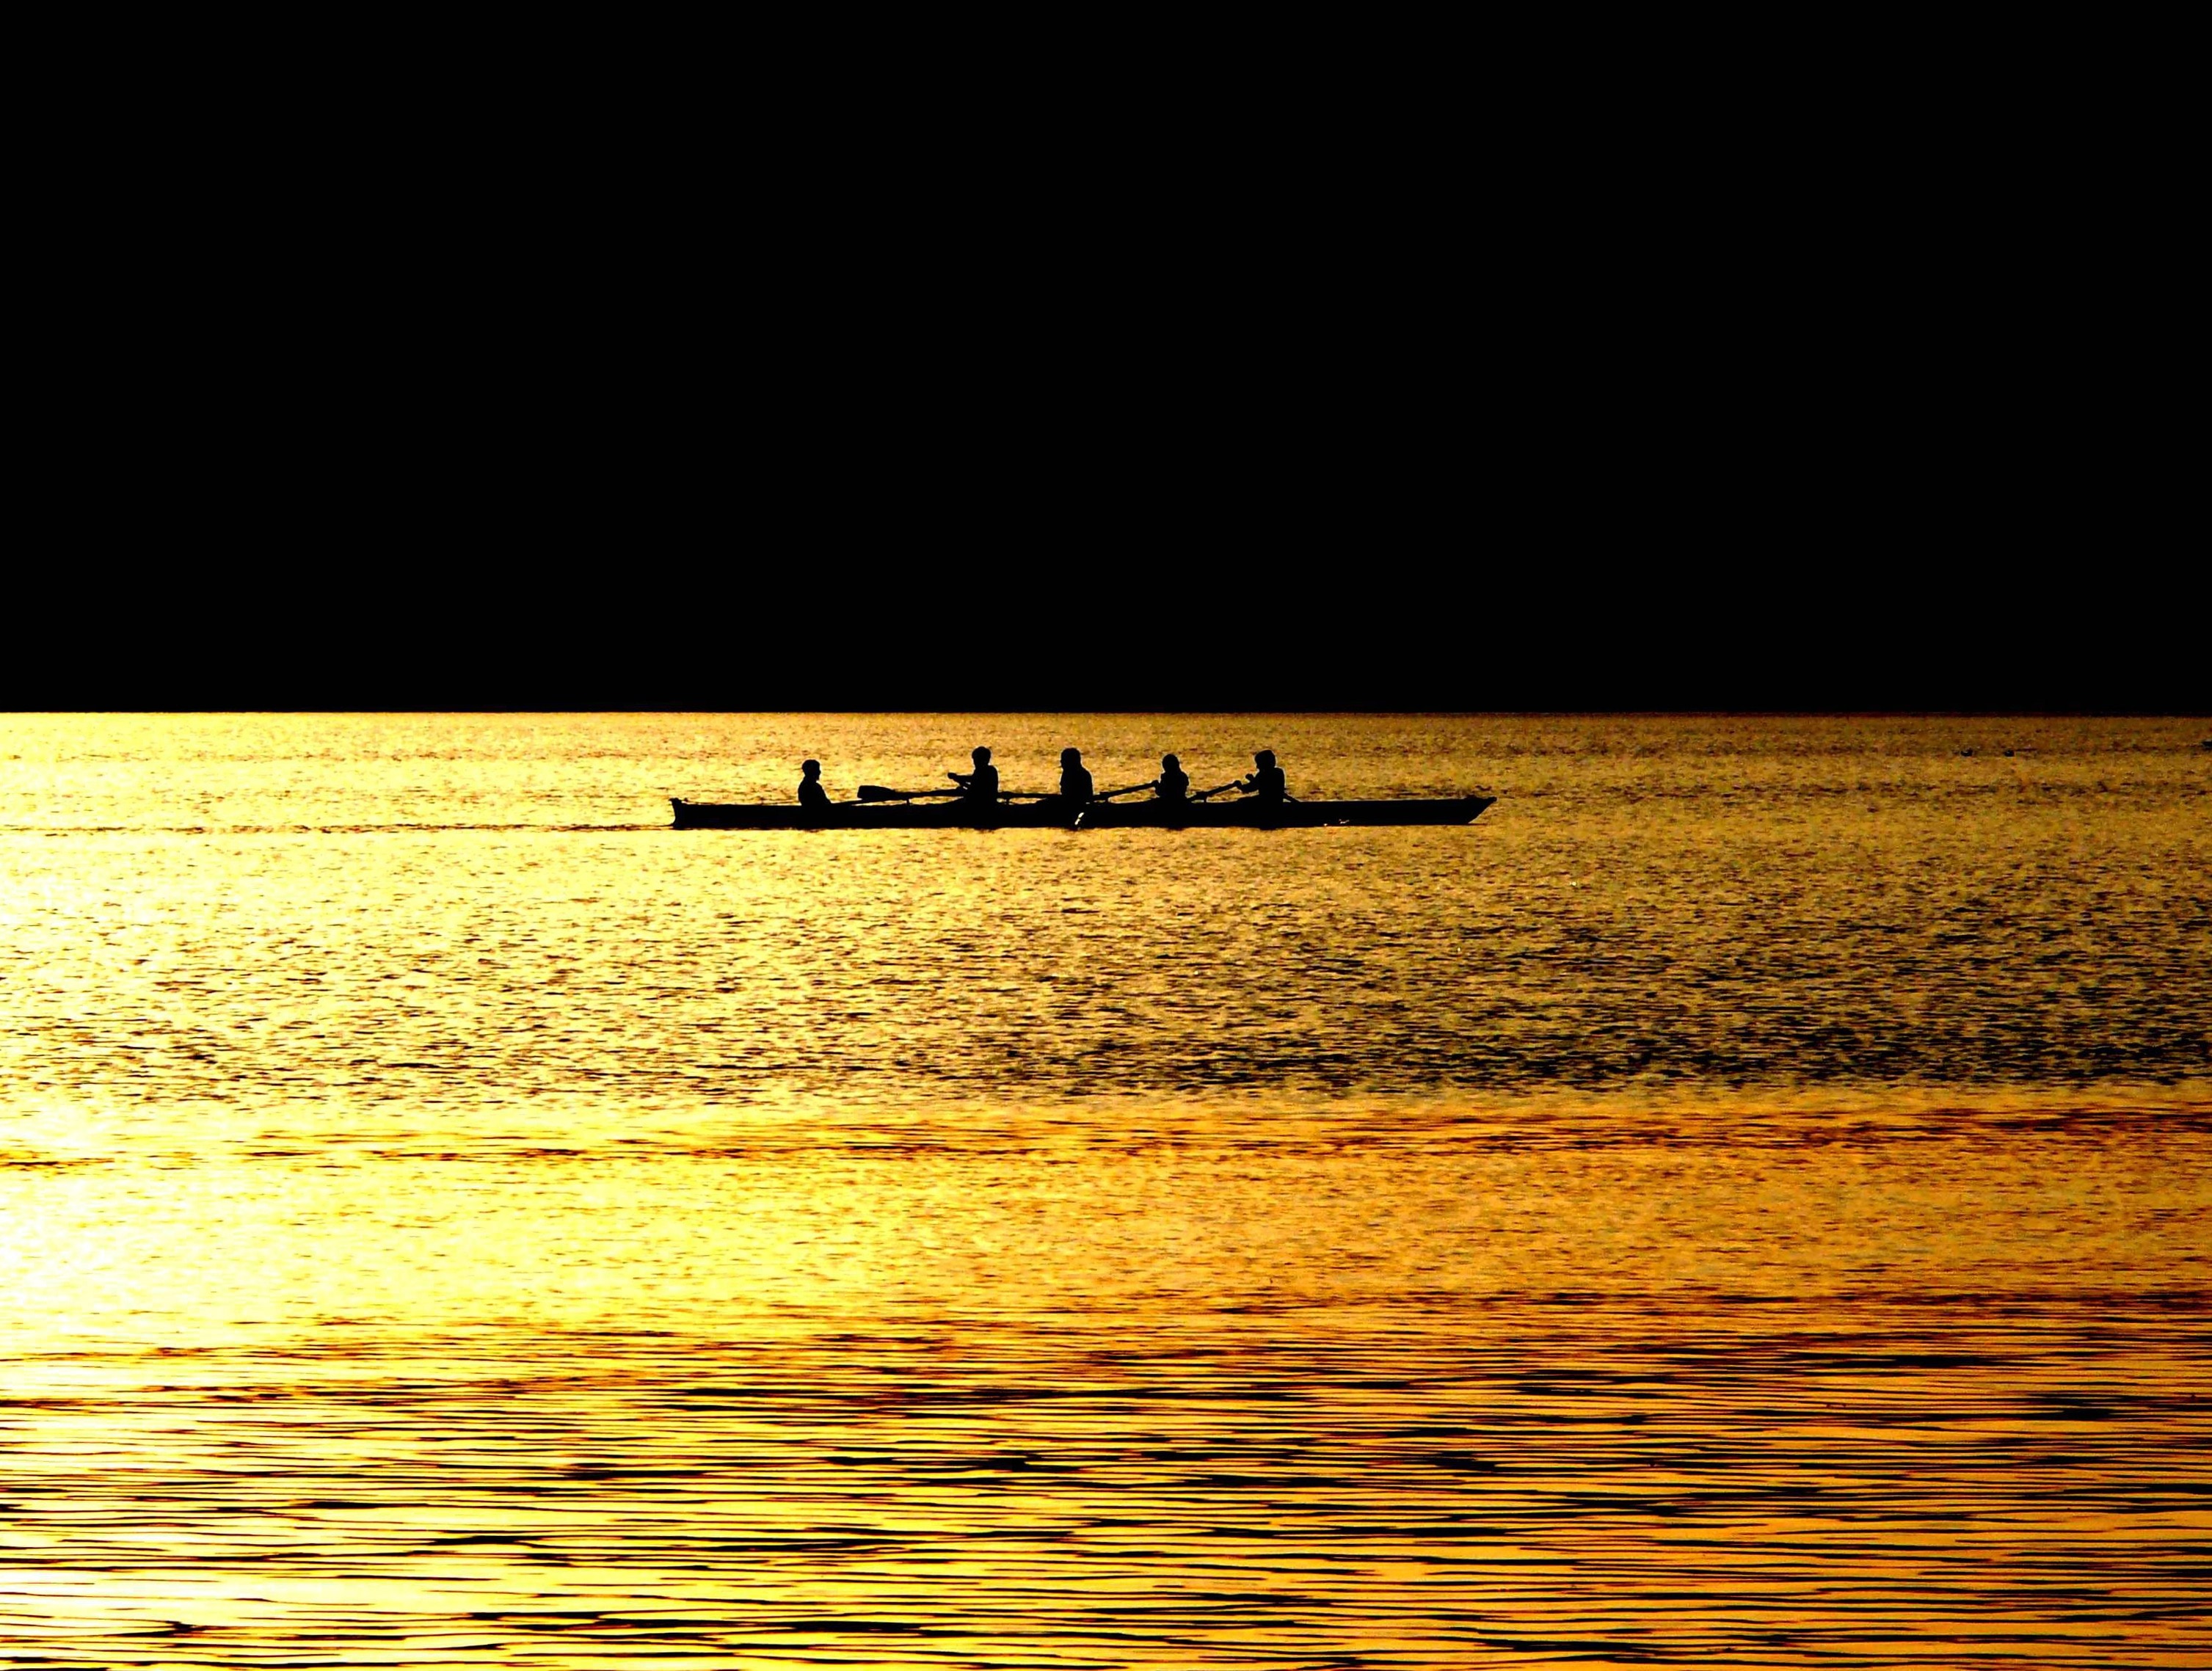 Rowing, Quad, Water, Rowing Boat, Gold, water, silhouette